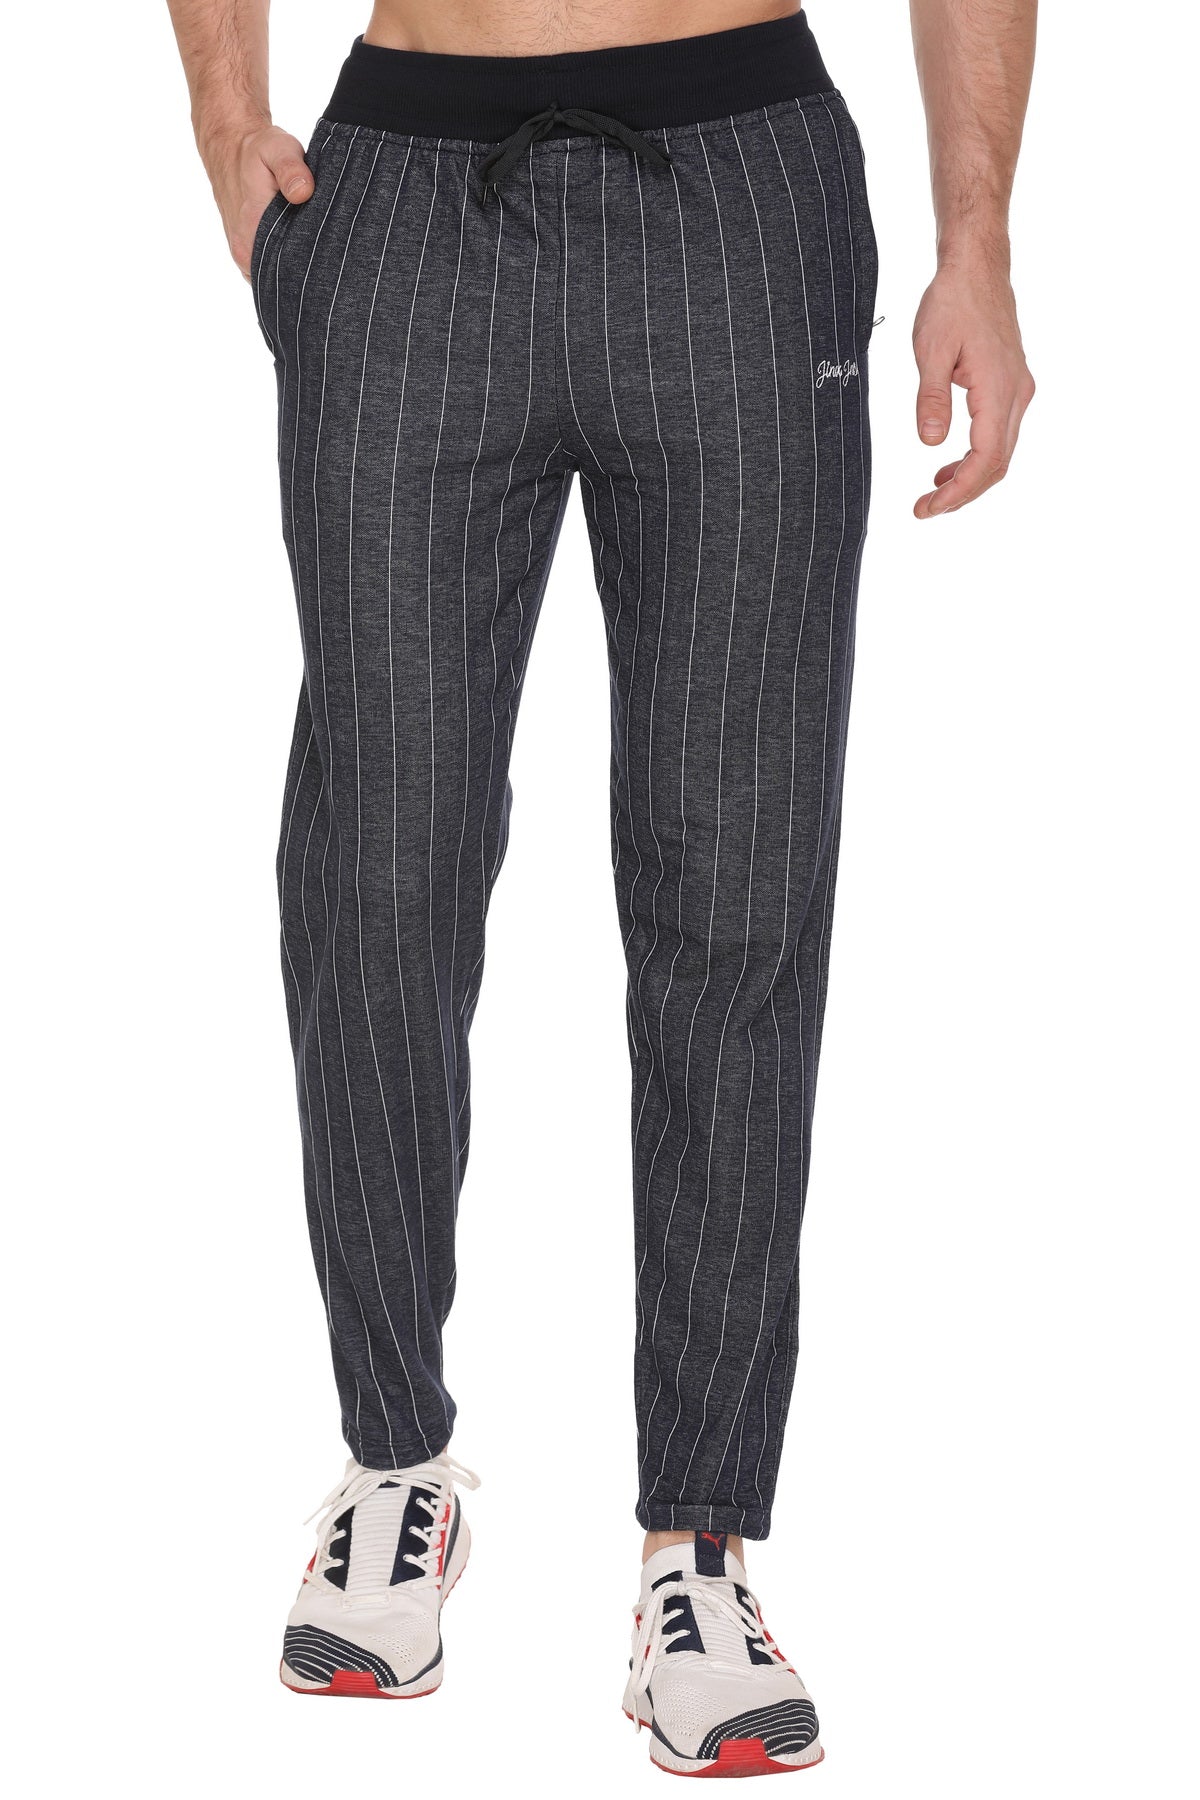 Polyester/Nylon Mens Cotton Night Pant, Size: M, L, Xl at Rs 199/piece in  Gulbarga